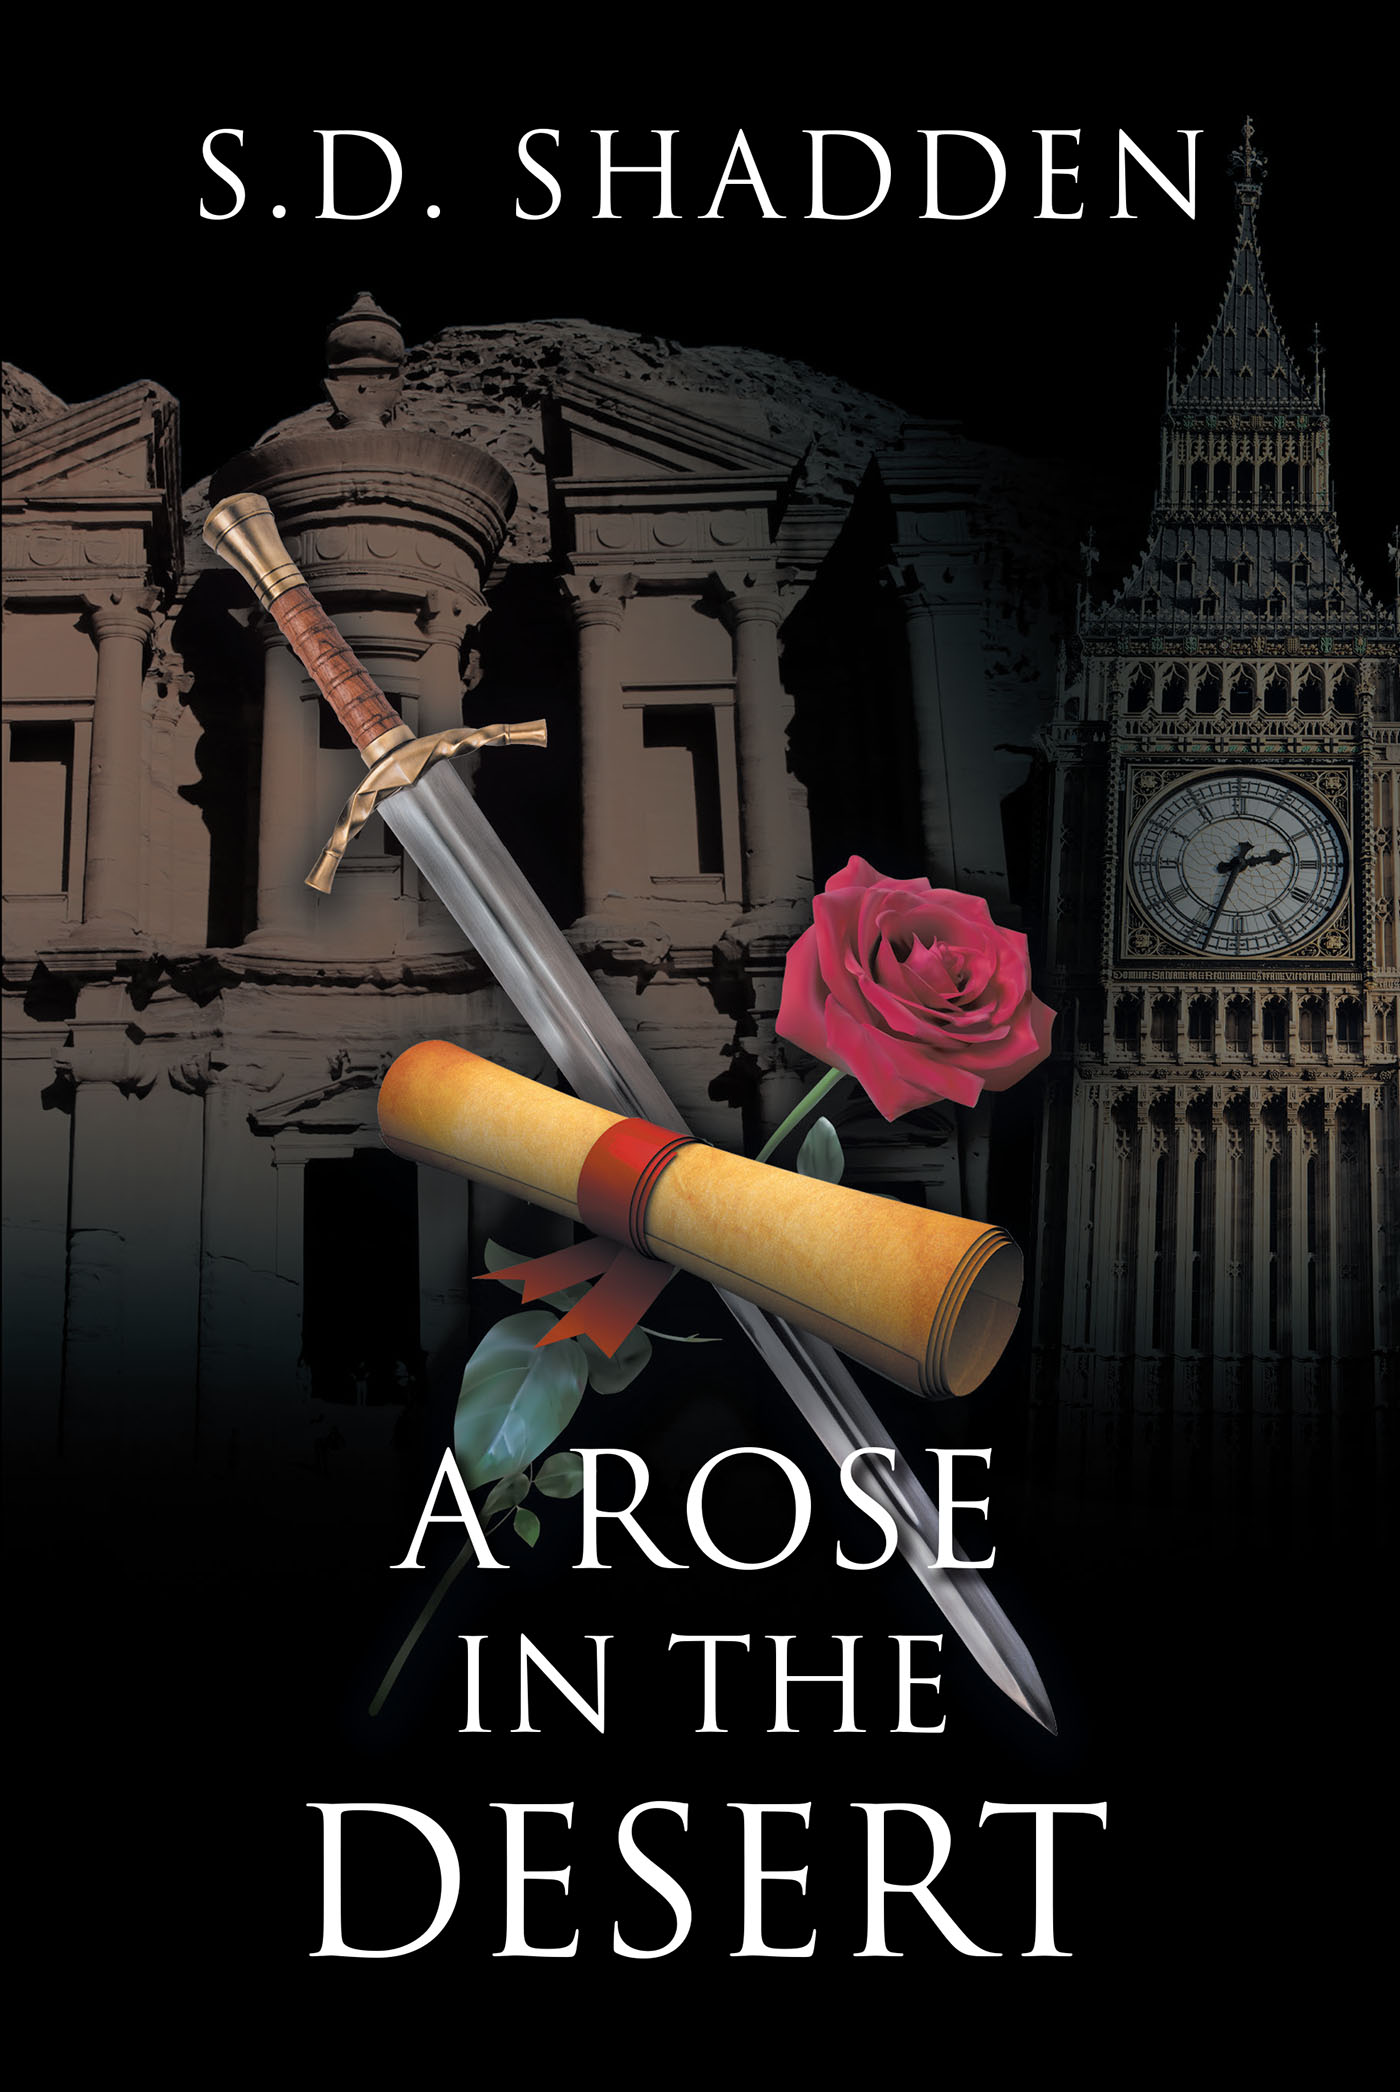 S. D. Shadden’s Newly Released "A Rose in the Desert" is a Suspenseful Fiction That Blends Compelling Narrative and a Complex Cast of Unique Characters